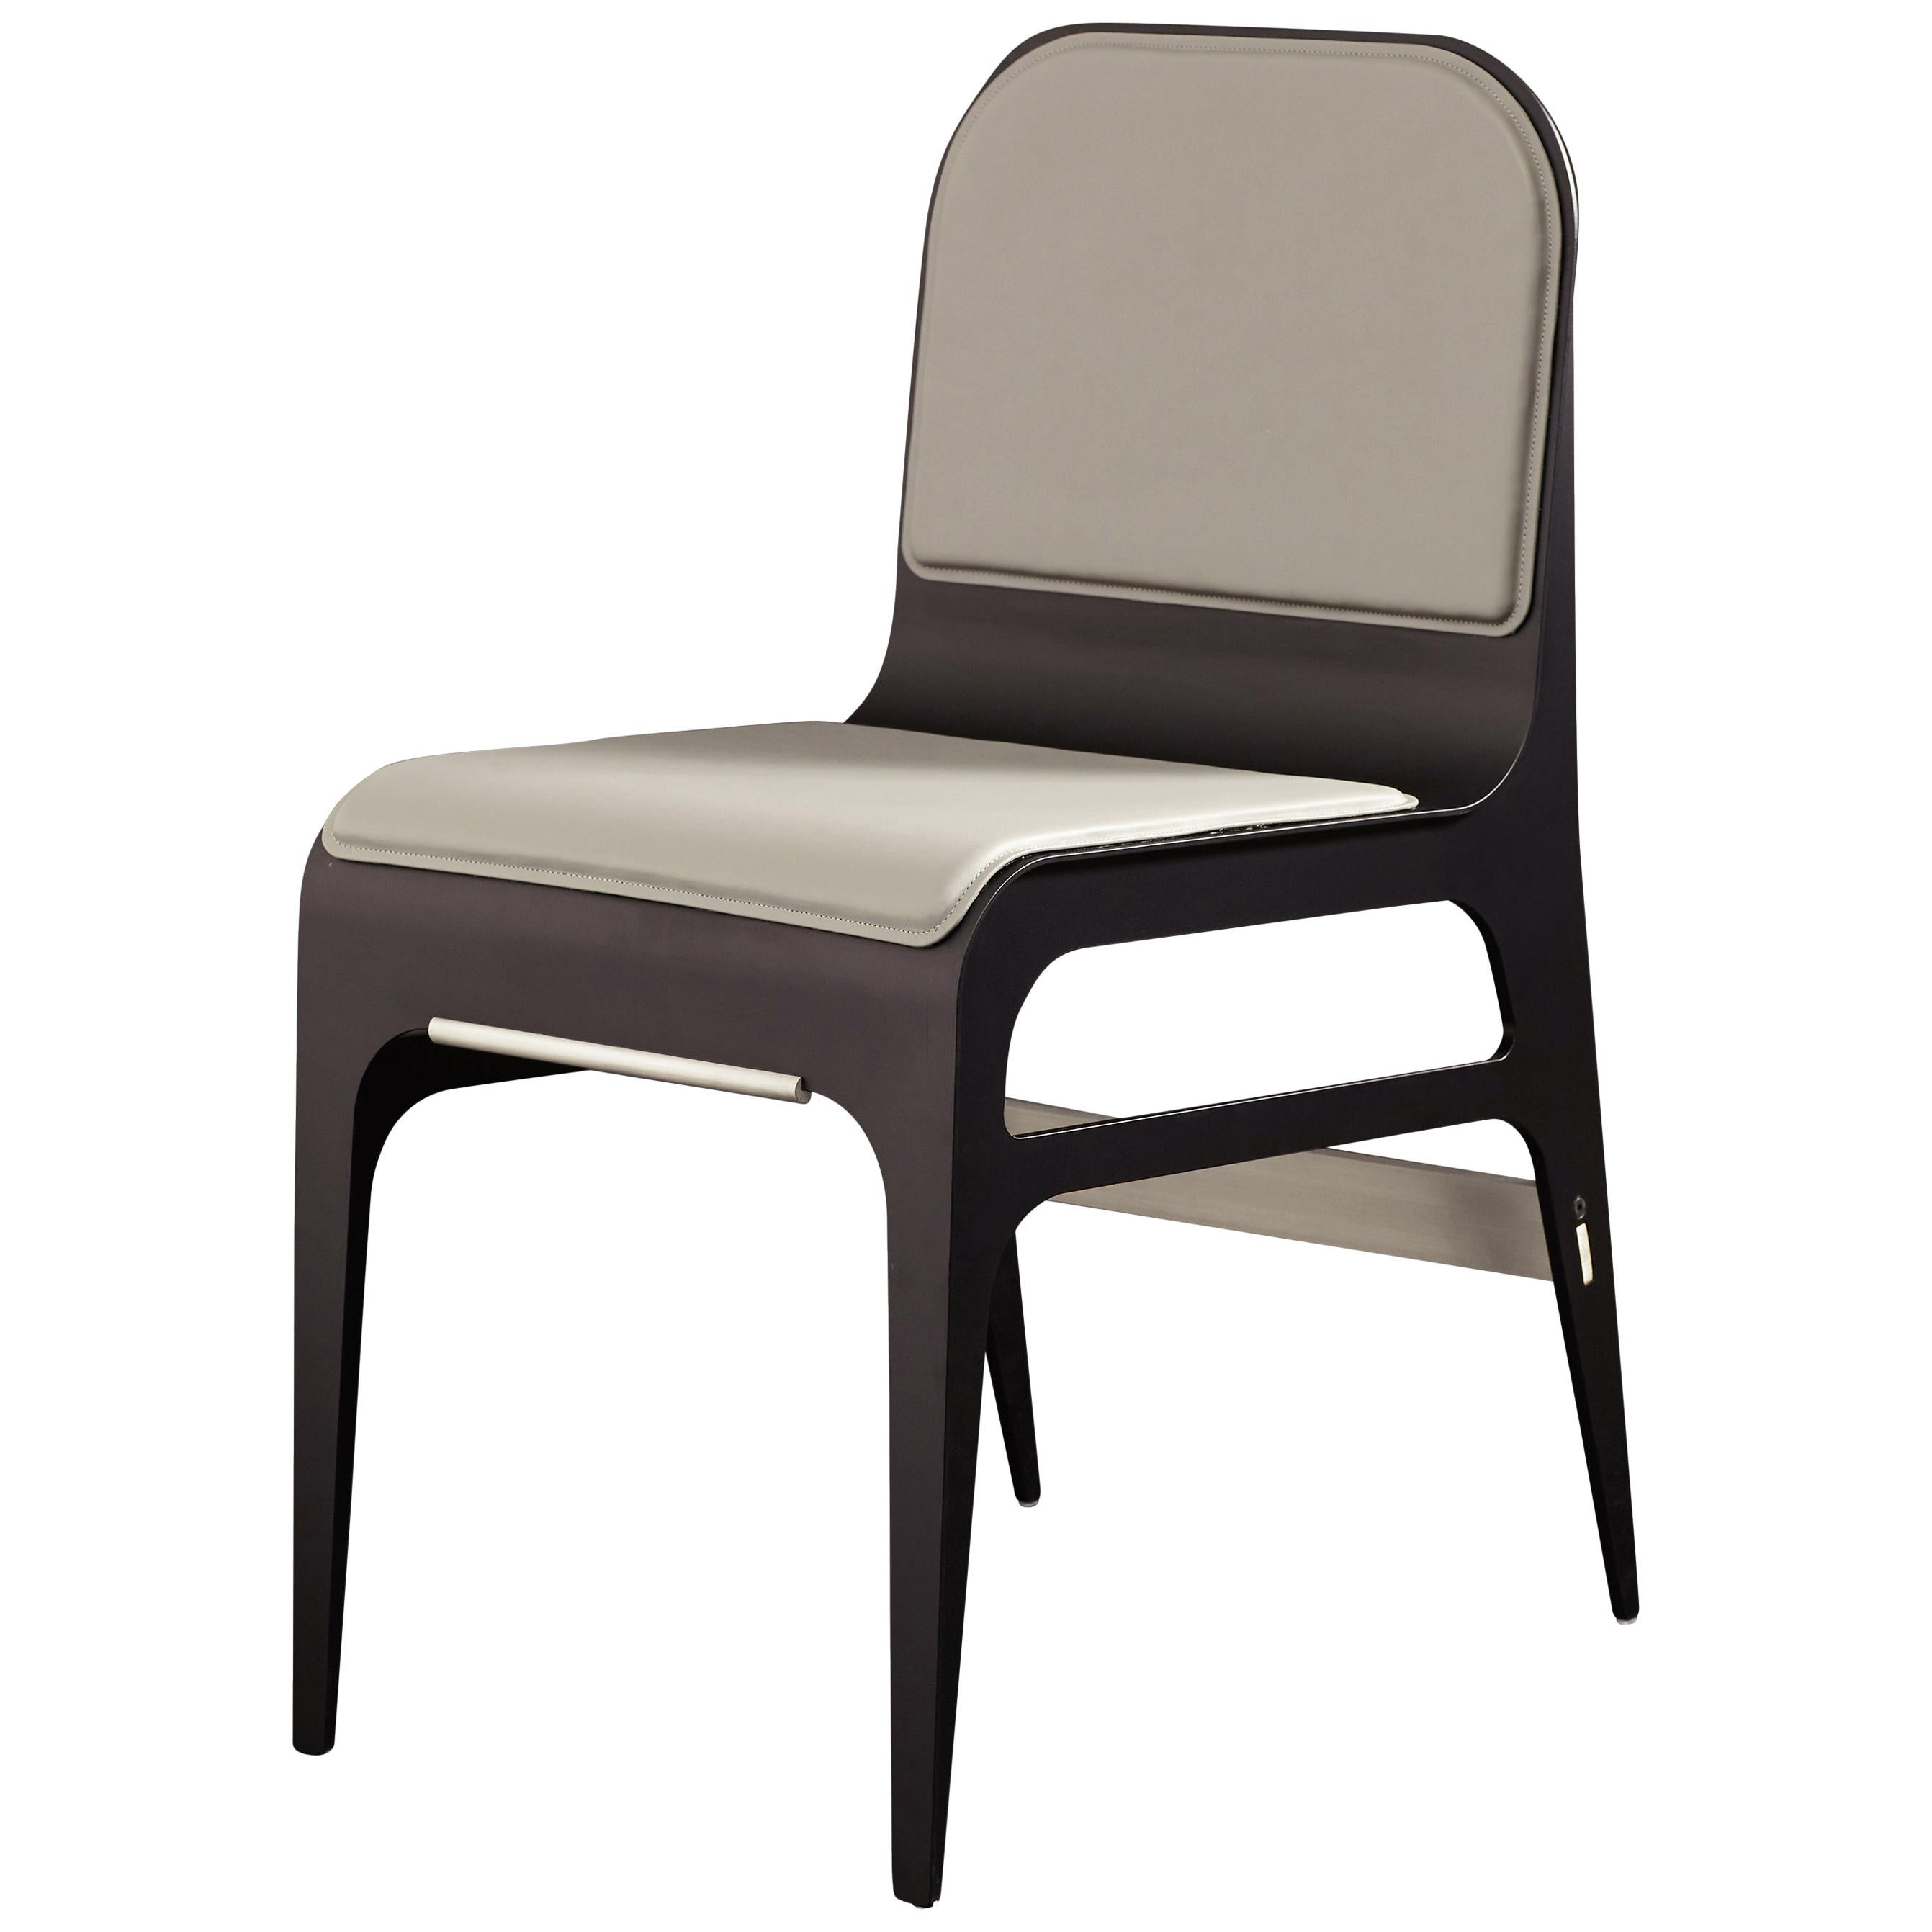 Gray (Slate Gray) Bardot Dining Chair with Leather Seat and Satin Nickel Hardware by Gabriel Scott